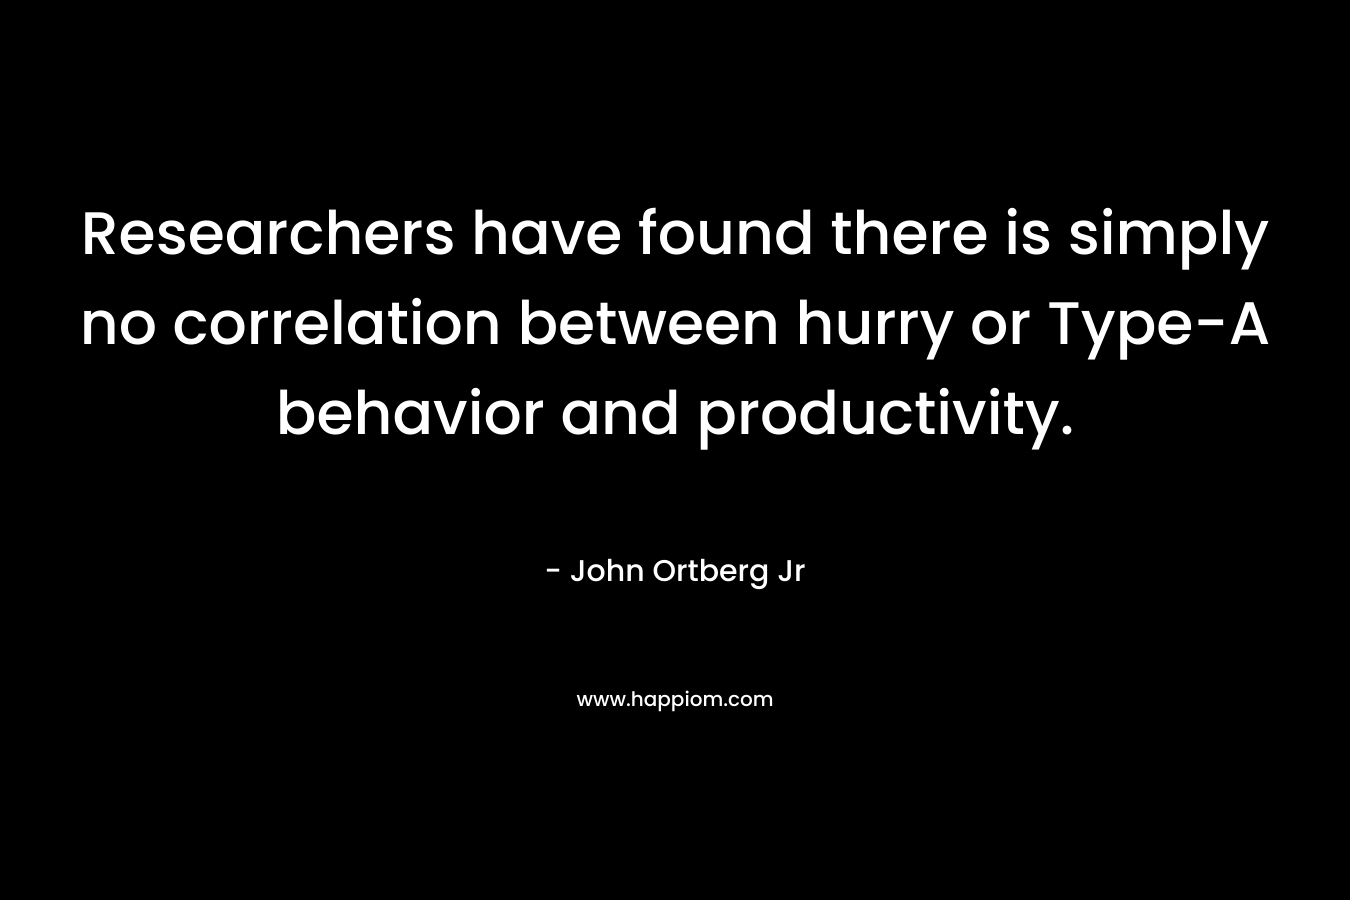 Researchers have found there is simply no correlation between hurry or Type-A behavior and productivity. – John Ortberg Jr